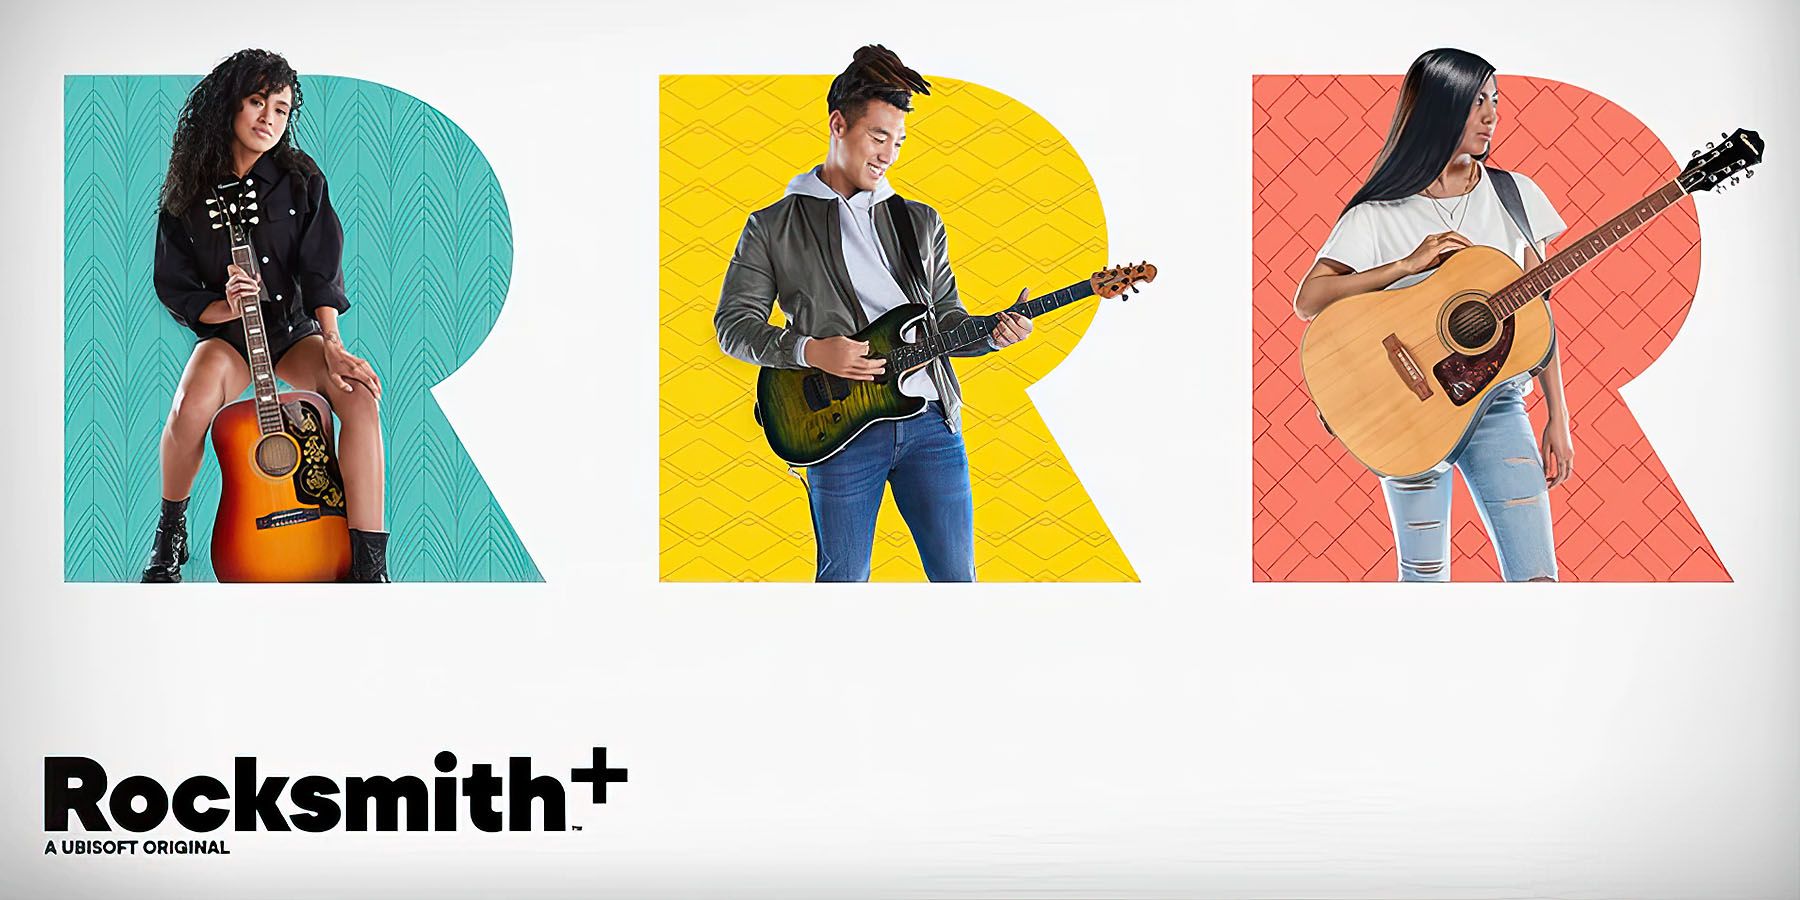 20% off a 3-month Rocksmith+ subscription